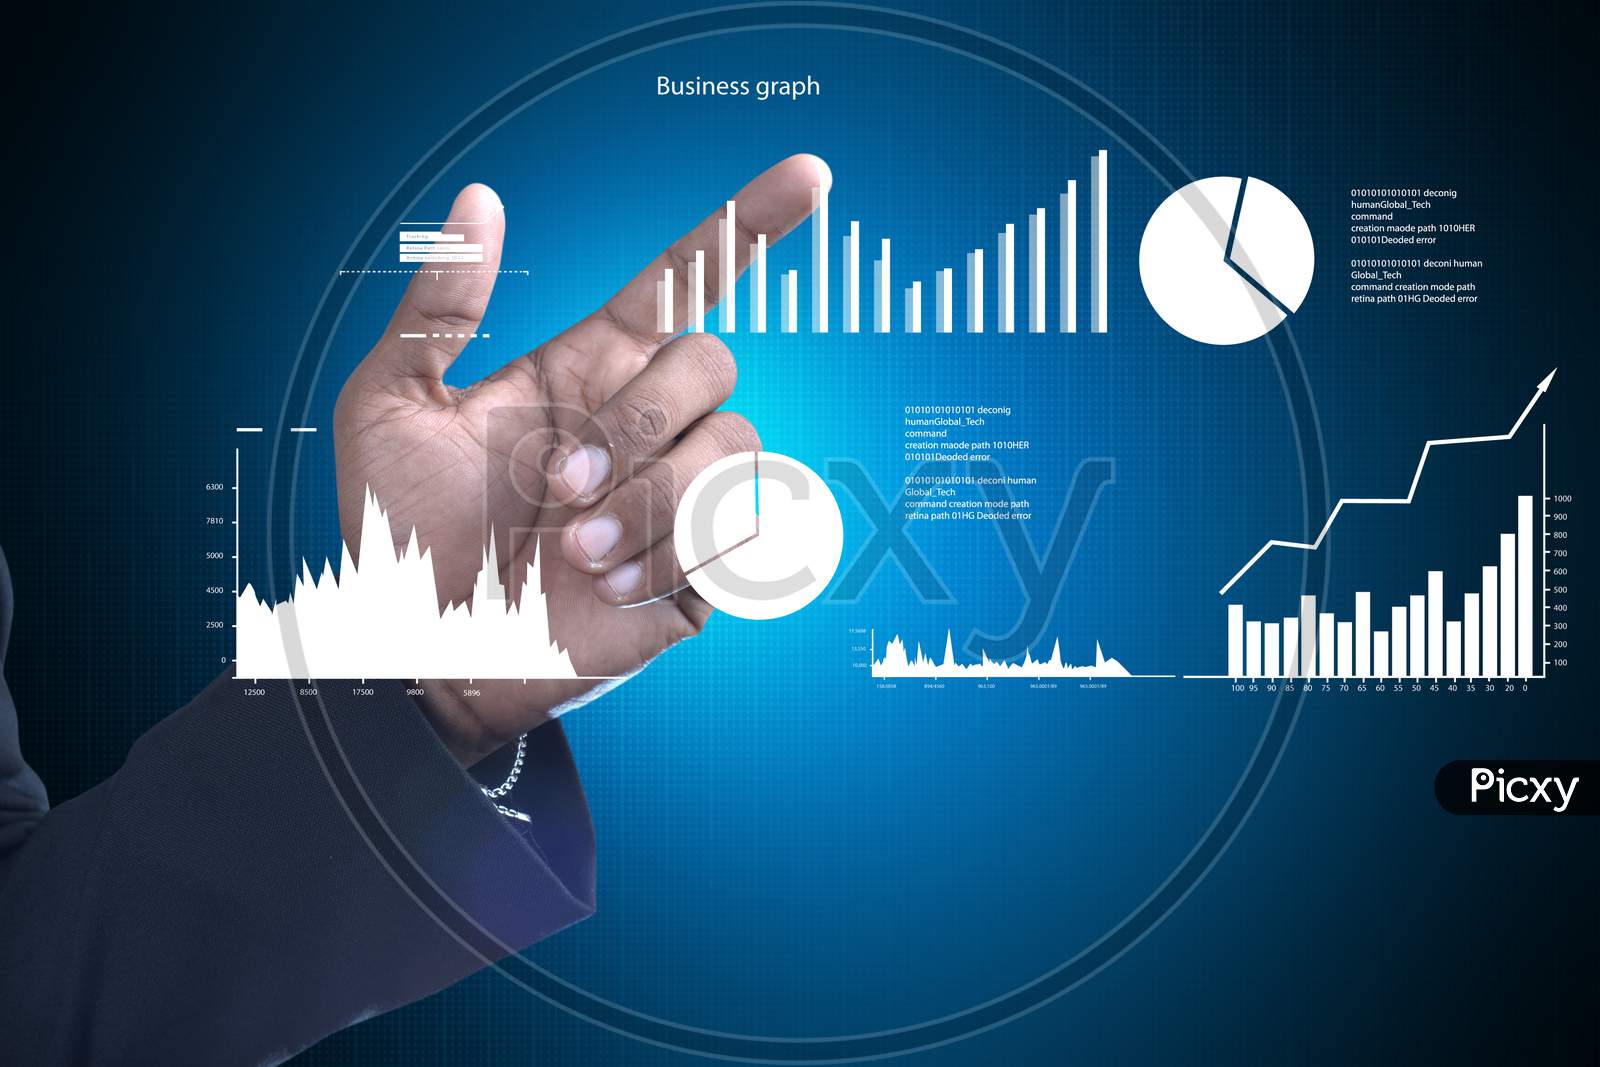 Close up shot of a Person's Hands pointing towards Growth Bars and Pie Charts